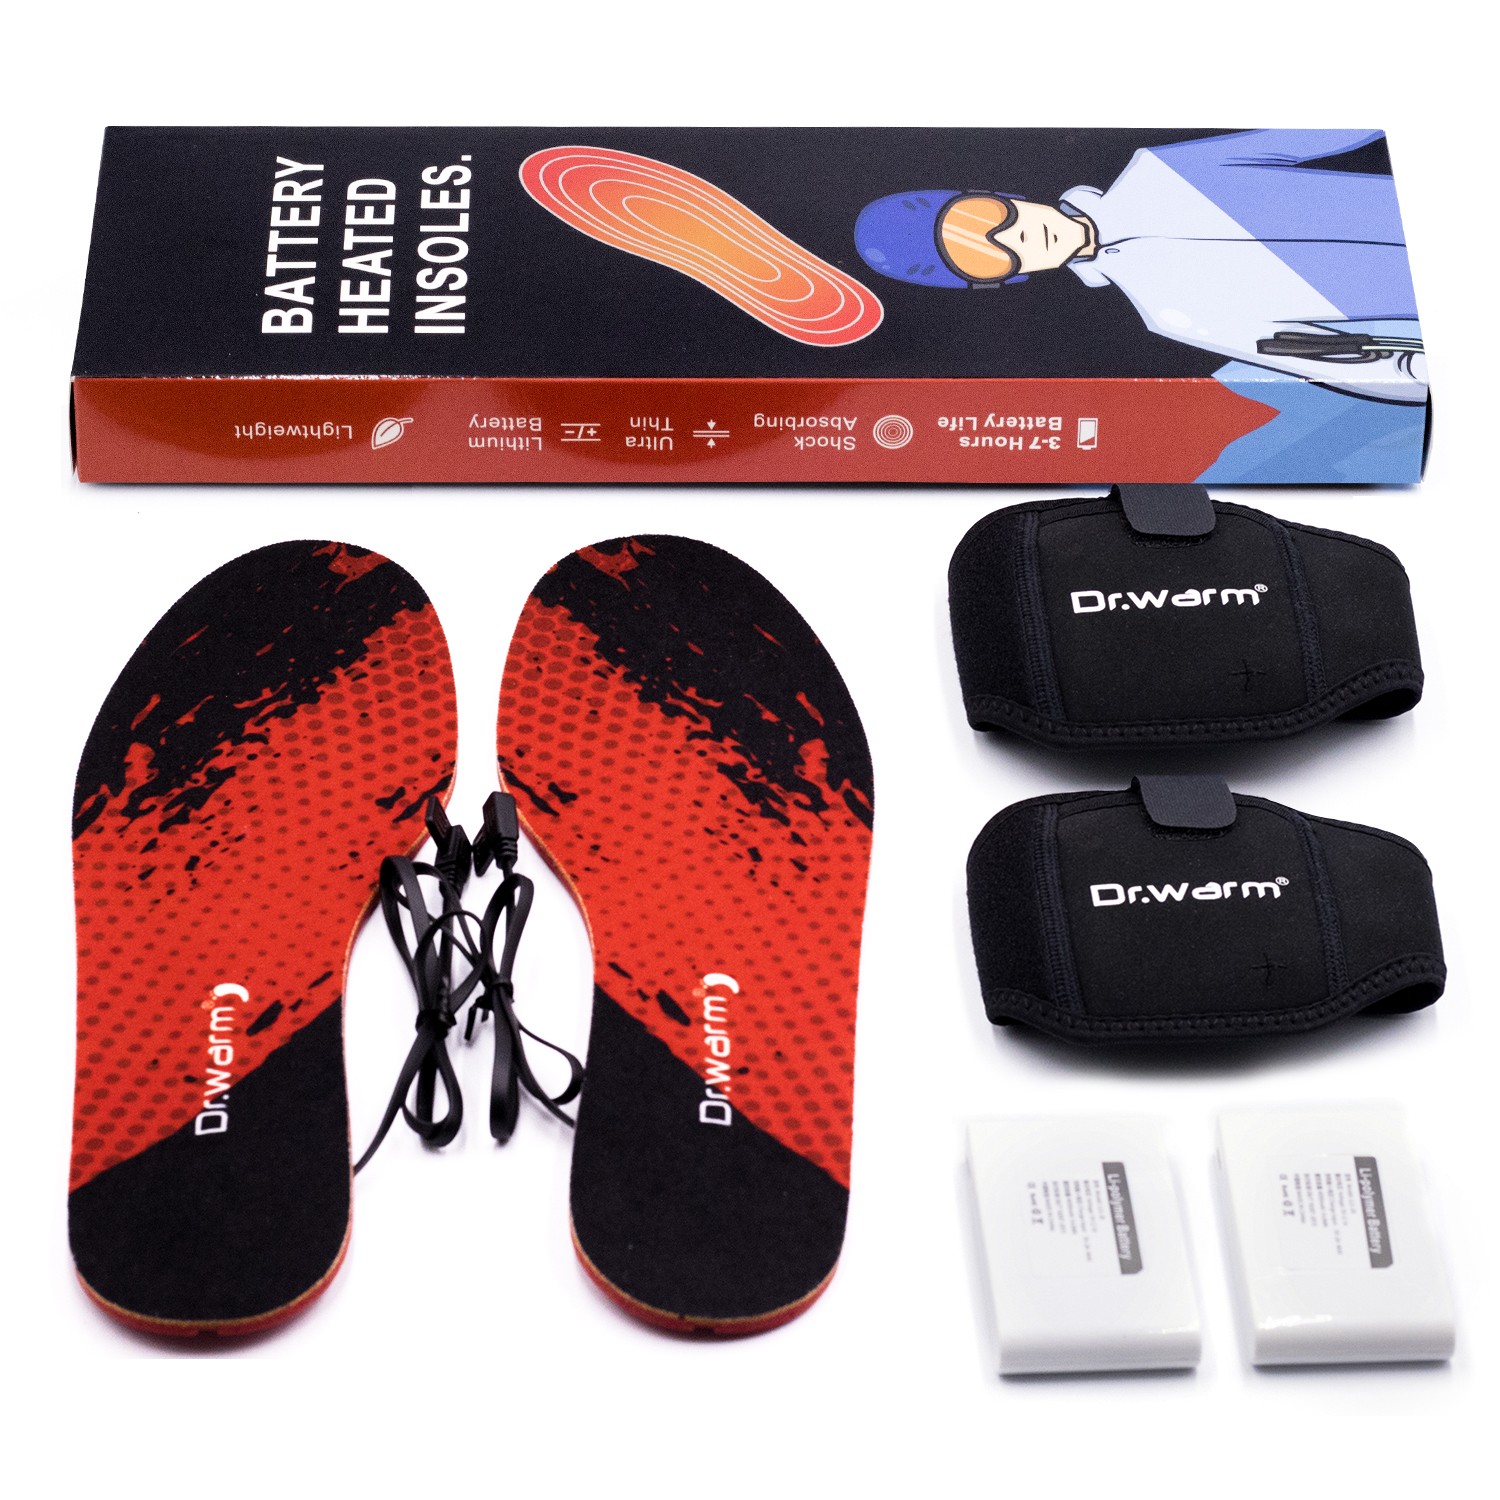 Dr. Warm heated shoe inserts-23